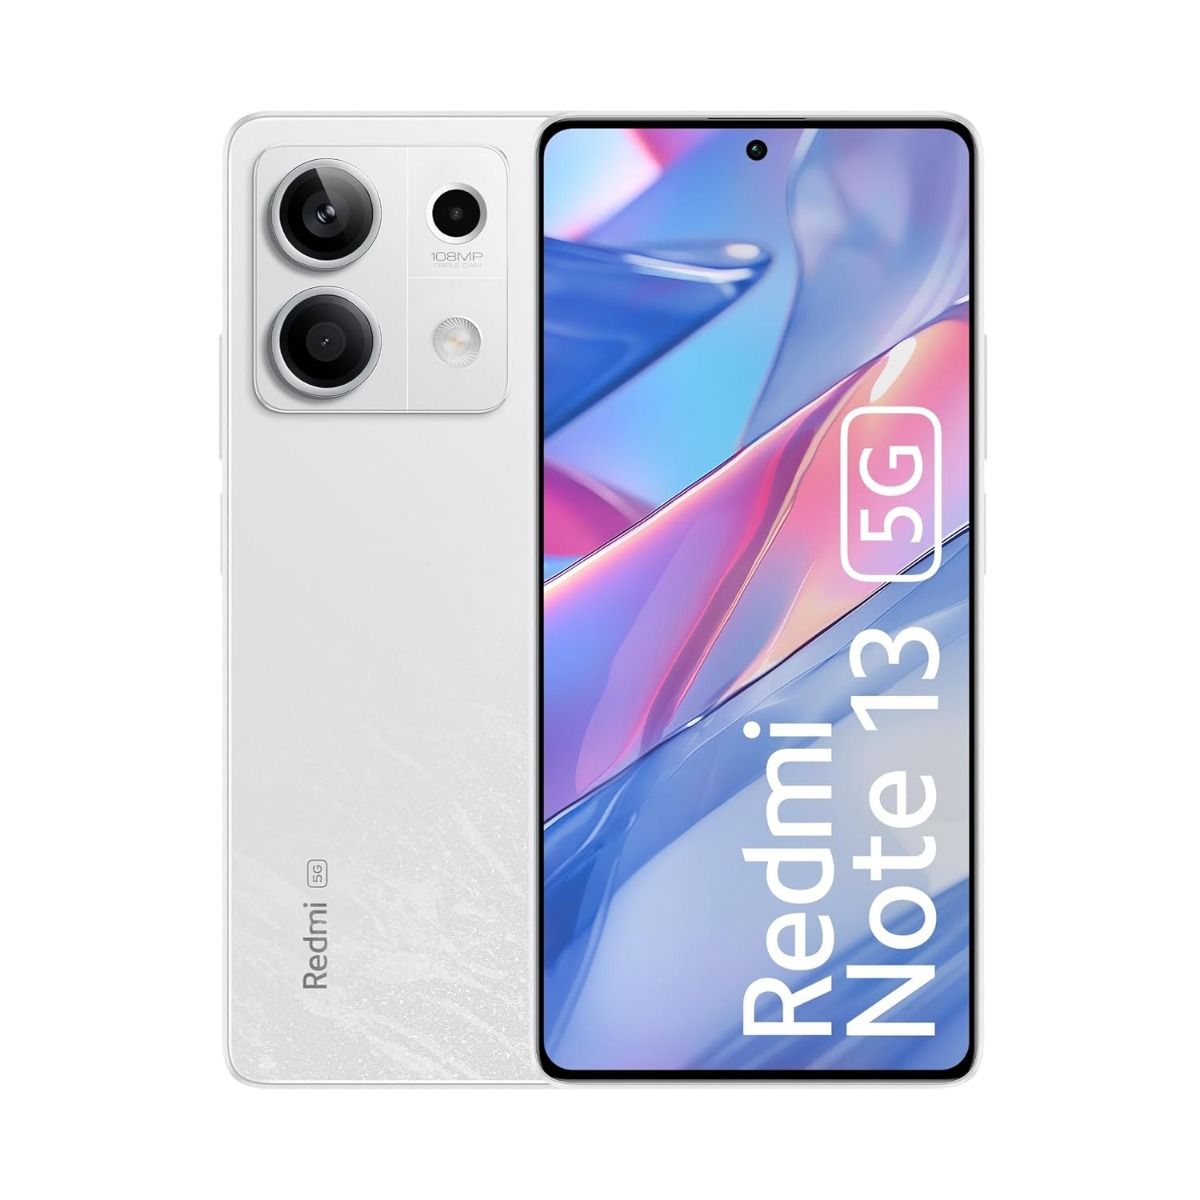 Buy realme C67 5G (Sunny Oasis, 128 GB) (6 GB RAM) at the Best